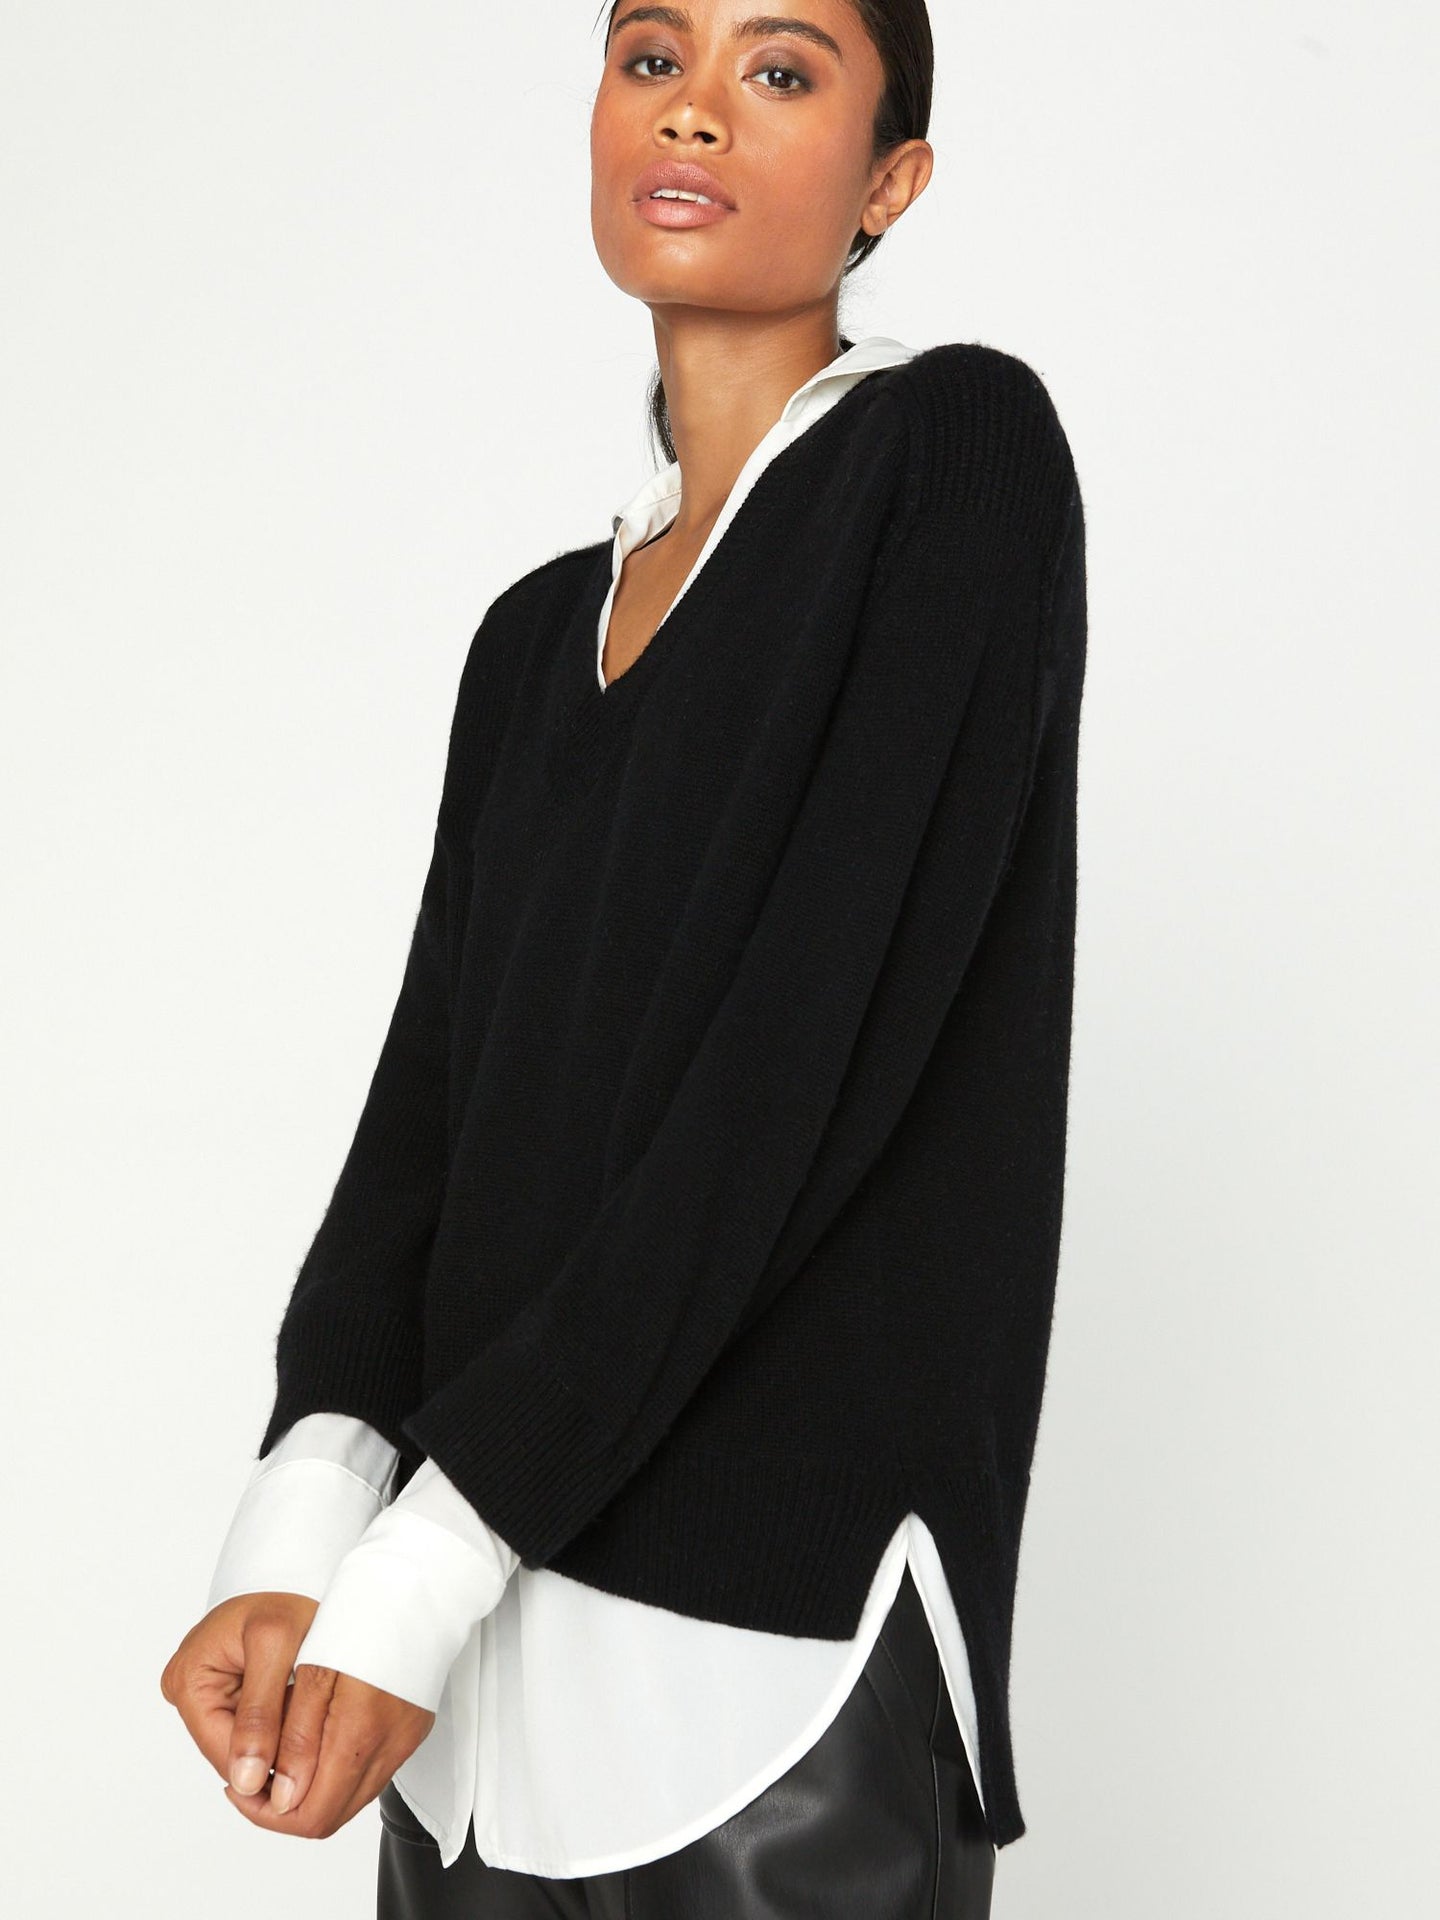 Women's V-neck Layered Pullover Sweater in Black Onyx